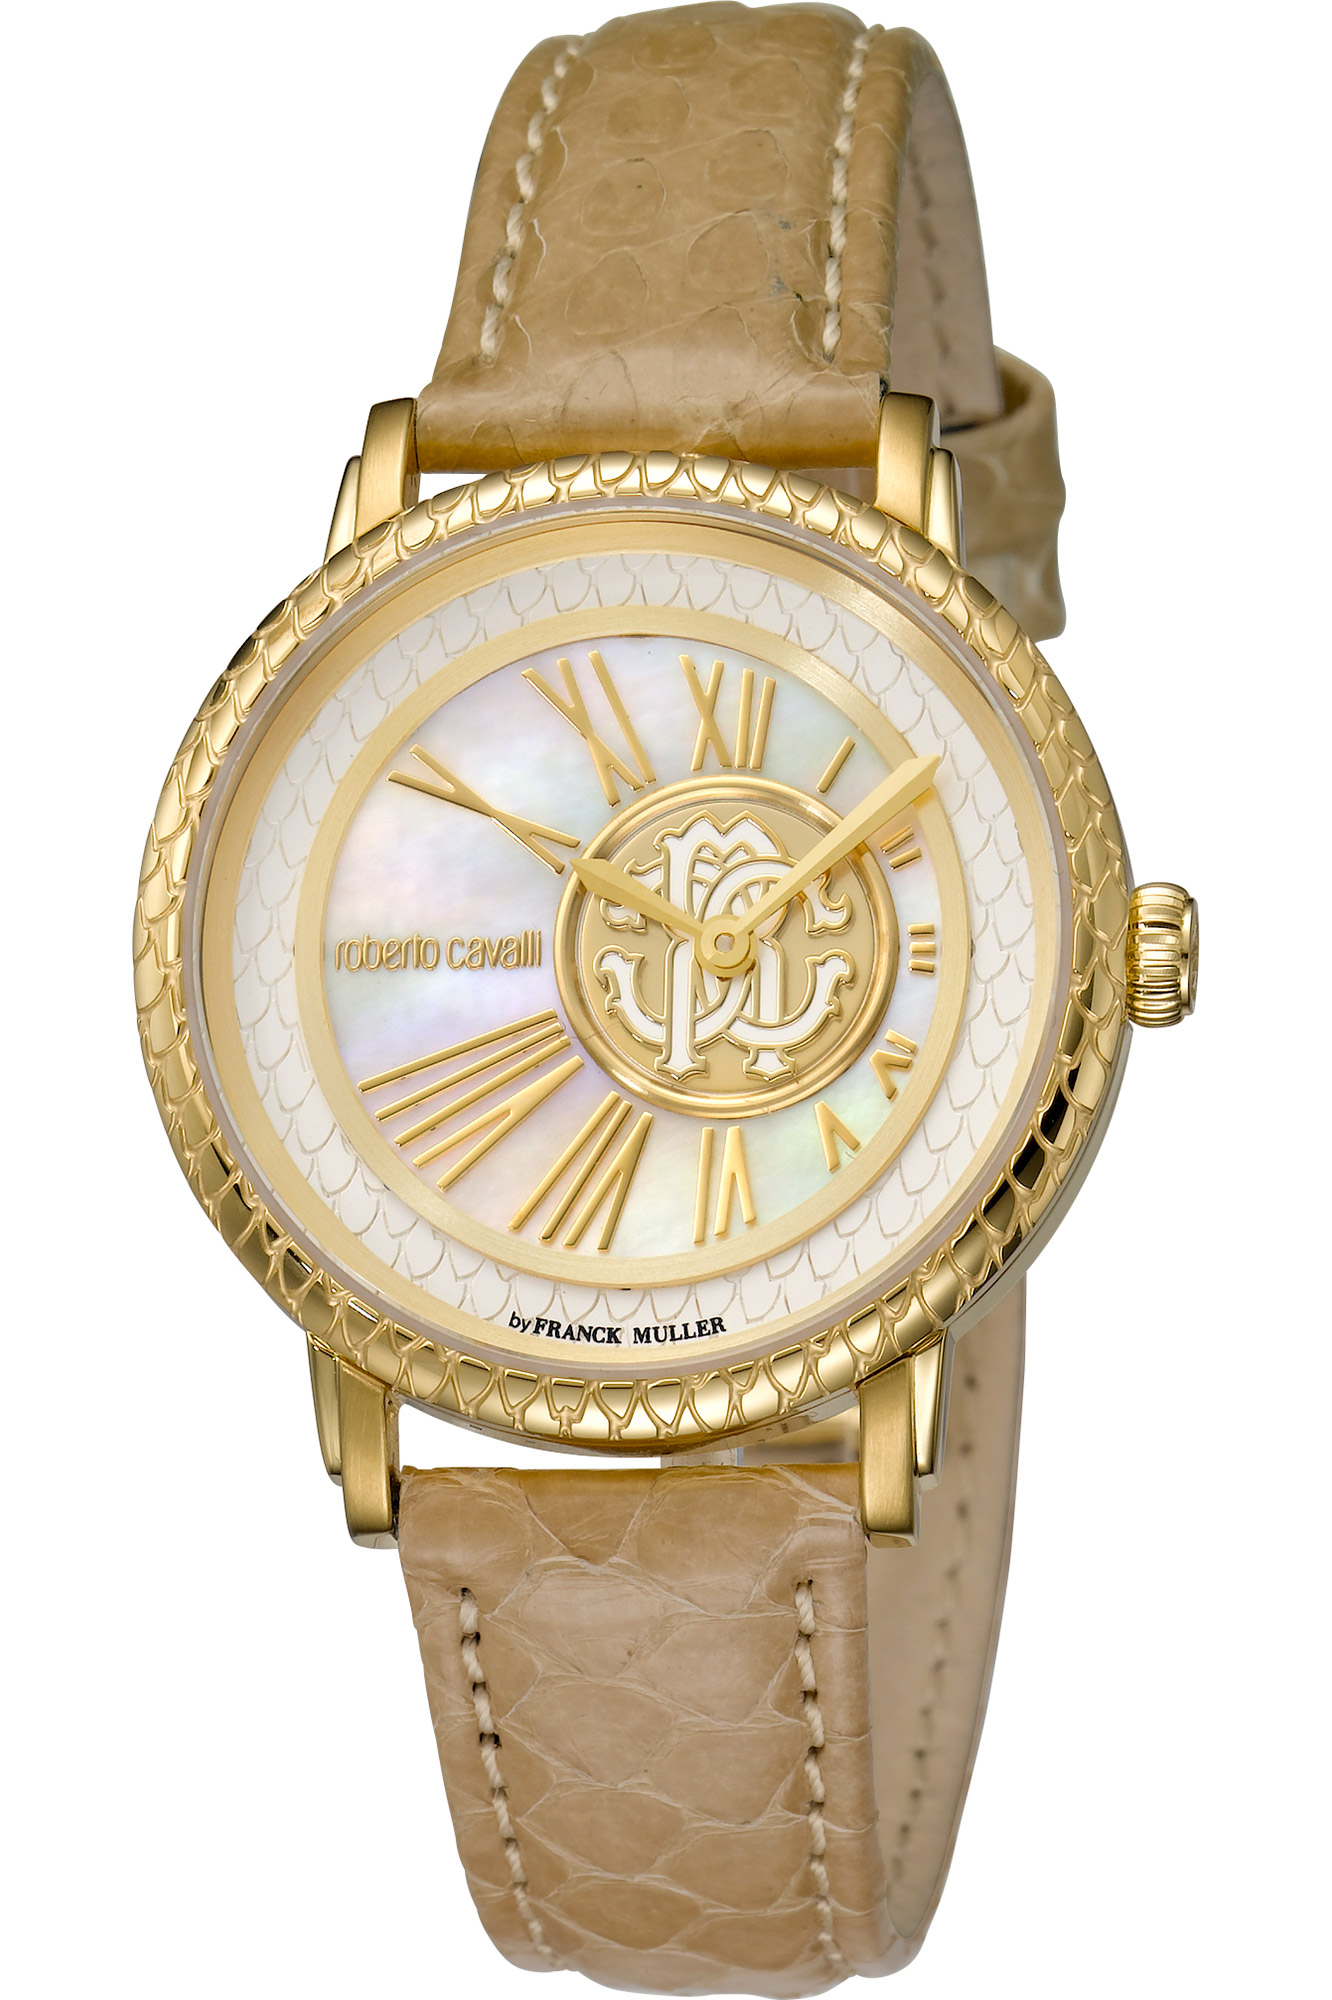 Roberto Cavalli by Franck MullerRV1L015L0021 - Aion Time